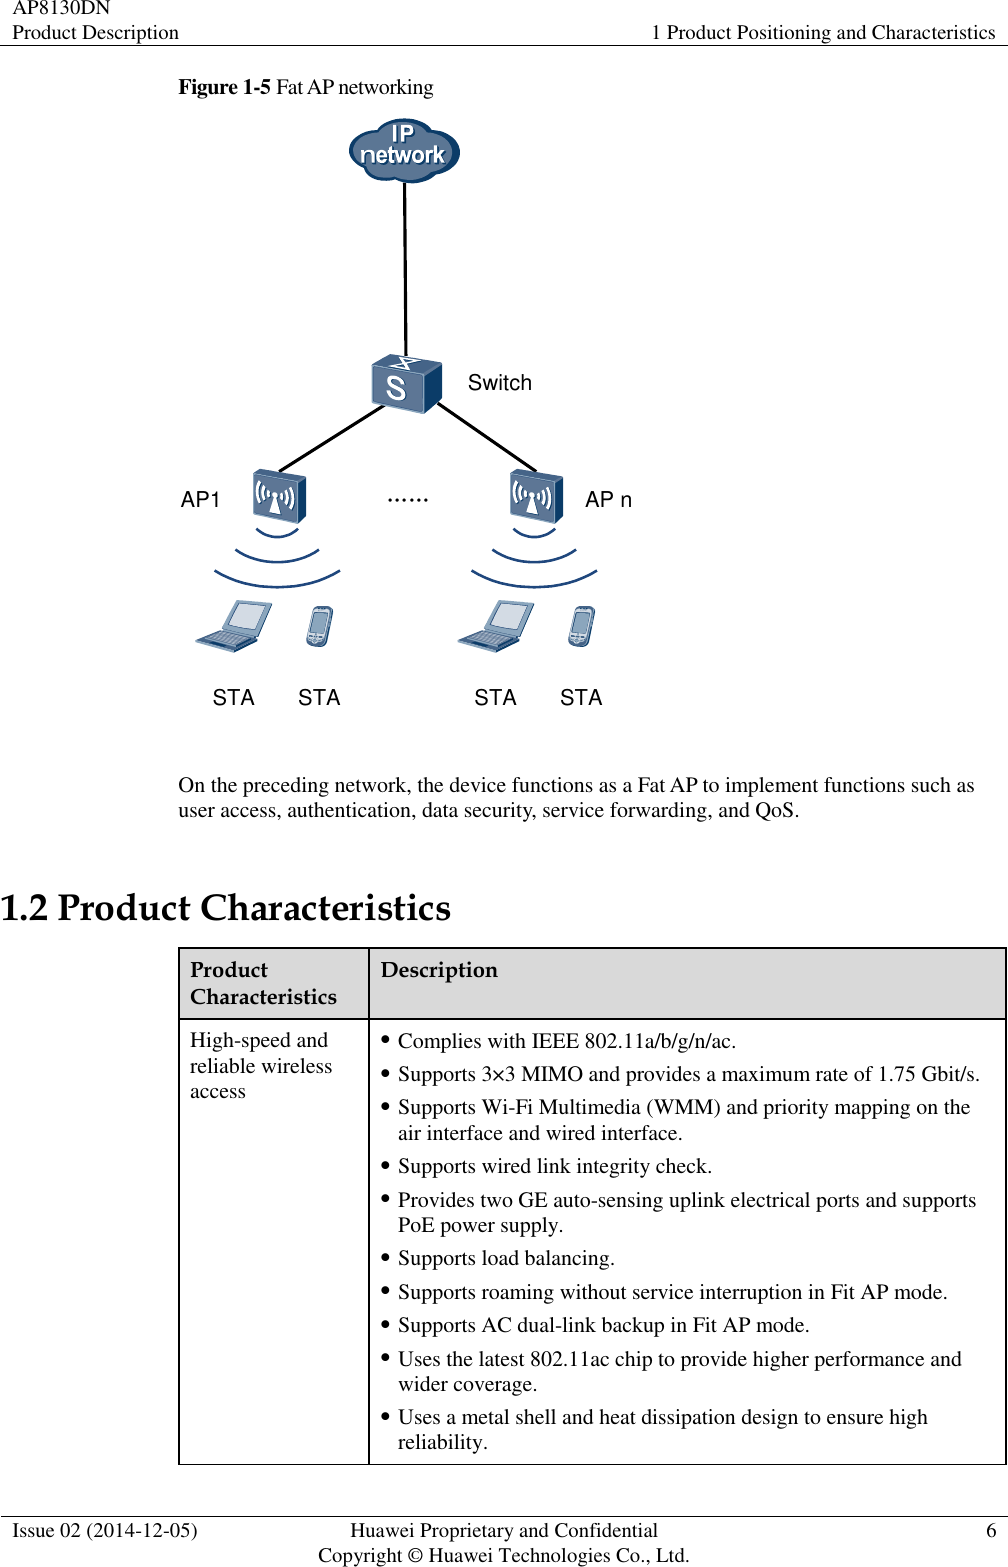 AP8130DN Product Description 1 Product Positioning and Characteristics  Issue 02 (2014-12-05) Huawei Proprietary and Confidential                                     Copyright © Huawei Technologies Co., Ltd. 6  Figure 1-5 Fat AP networking AP nAP1 ……SwitchSTA STASTA STA  On the preceding network, the device functions as a Fat AP to implement functions such as user access, authentication, data security, service forwarding, and QoS.   1.2 Product Characteristics Product Characteristics Description High-speed and reliable wireless access  Complies with IEEE 802.11a/b/g/n/ac.  Supports 3×3 MIMO and provides a maximum rate of 1.75 Gbit/s.  Supports Wi-Fi Multimedia (WMM) and priority mapping on the air interface and wired interface.  Supports wired link integrity check.  Provides two GE auto-sensing uplink electrical ports and supports PoE power supply.  Supports load balancing.  Supports roaming without service interruption in Fit AP mode.  Supports AC dual-link backup in Fit AP mode.  Uses the latest 802.11ac chip to provide higher performance and wider coverage.  Uses a metal shell and heat dissipation design to ensure high reliability. 